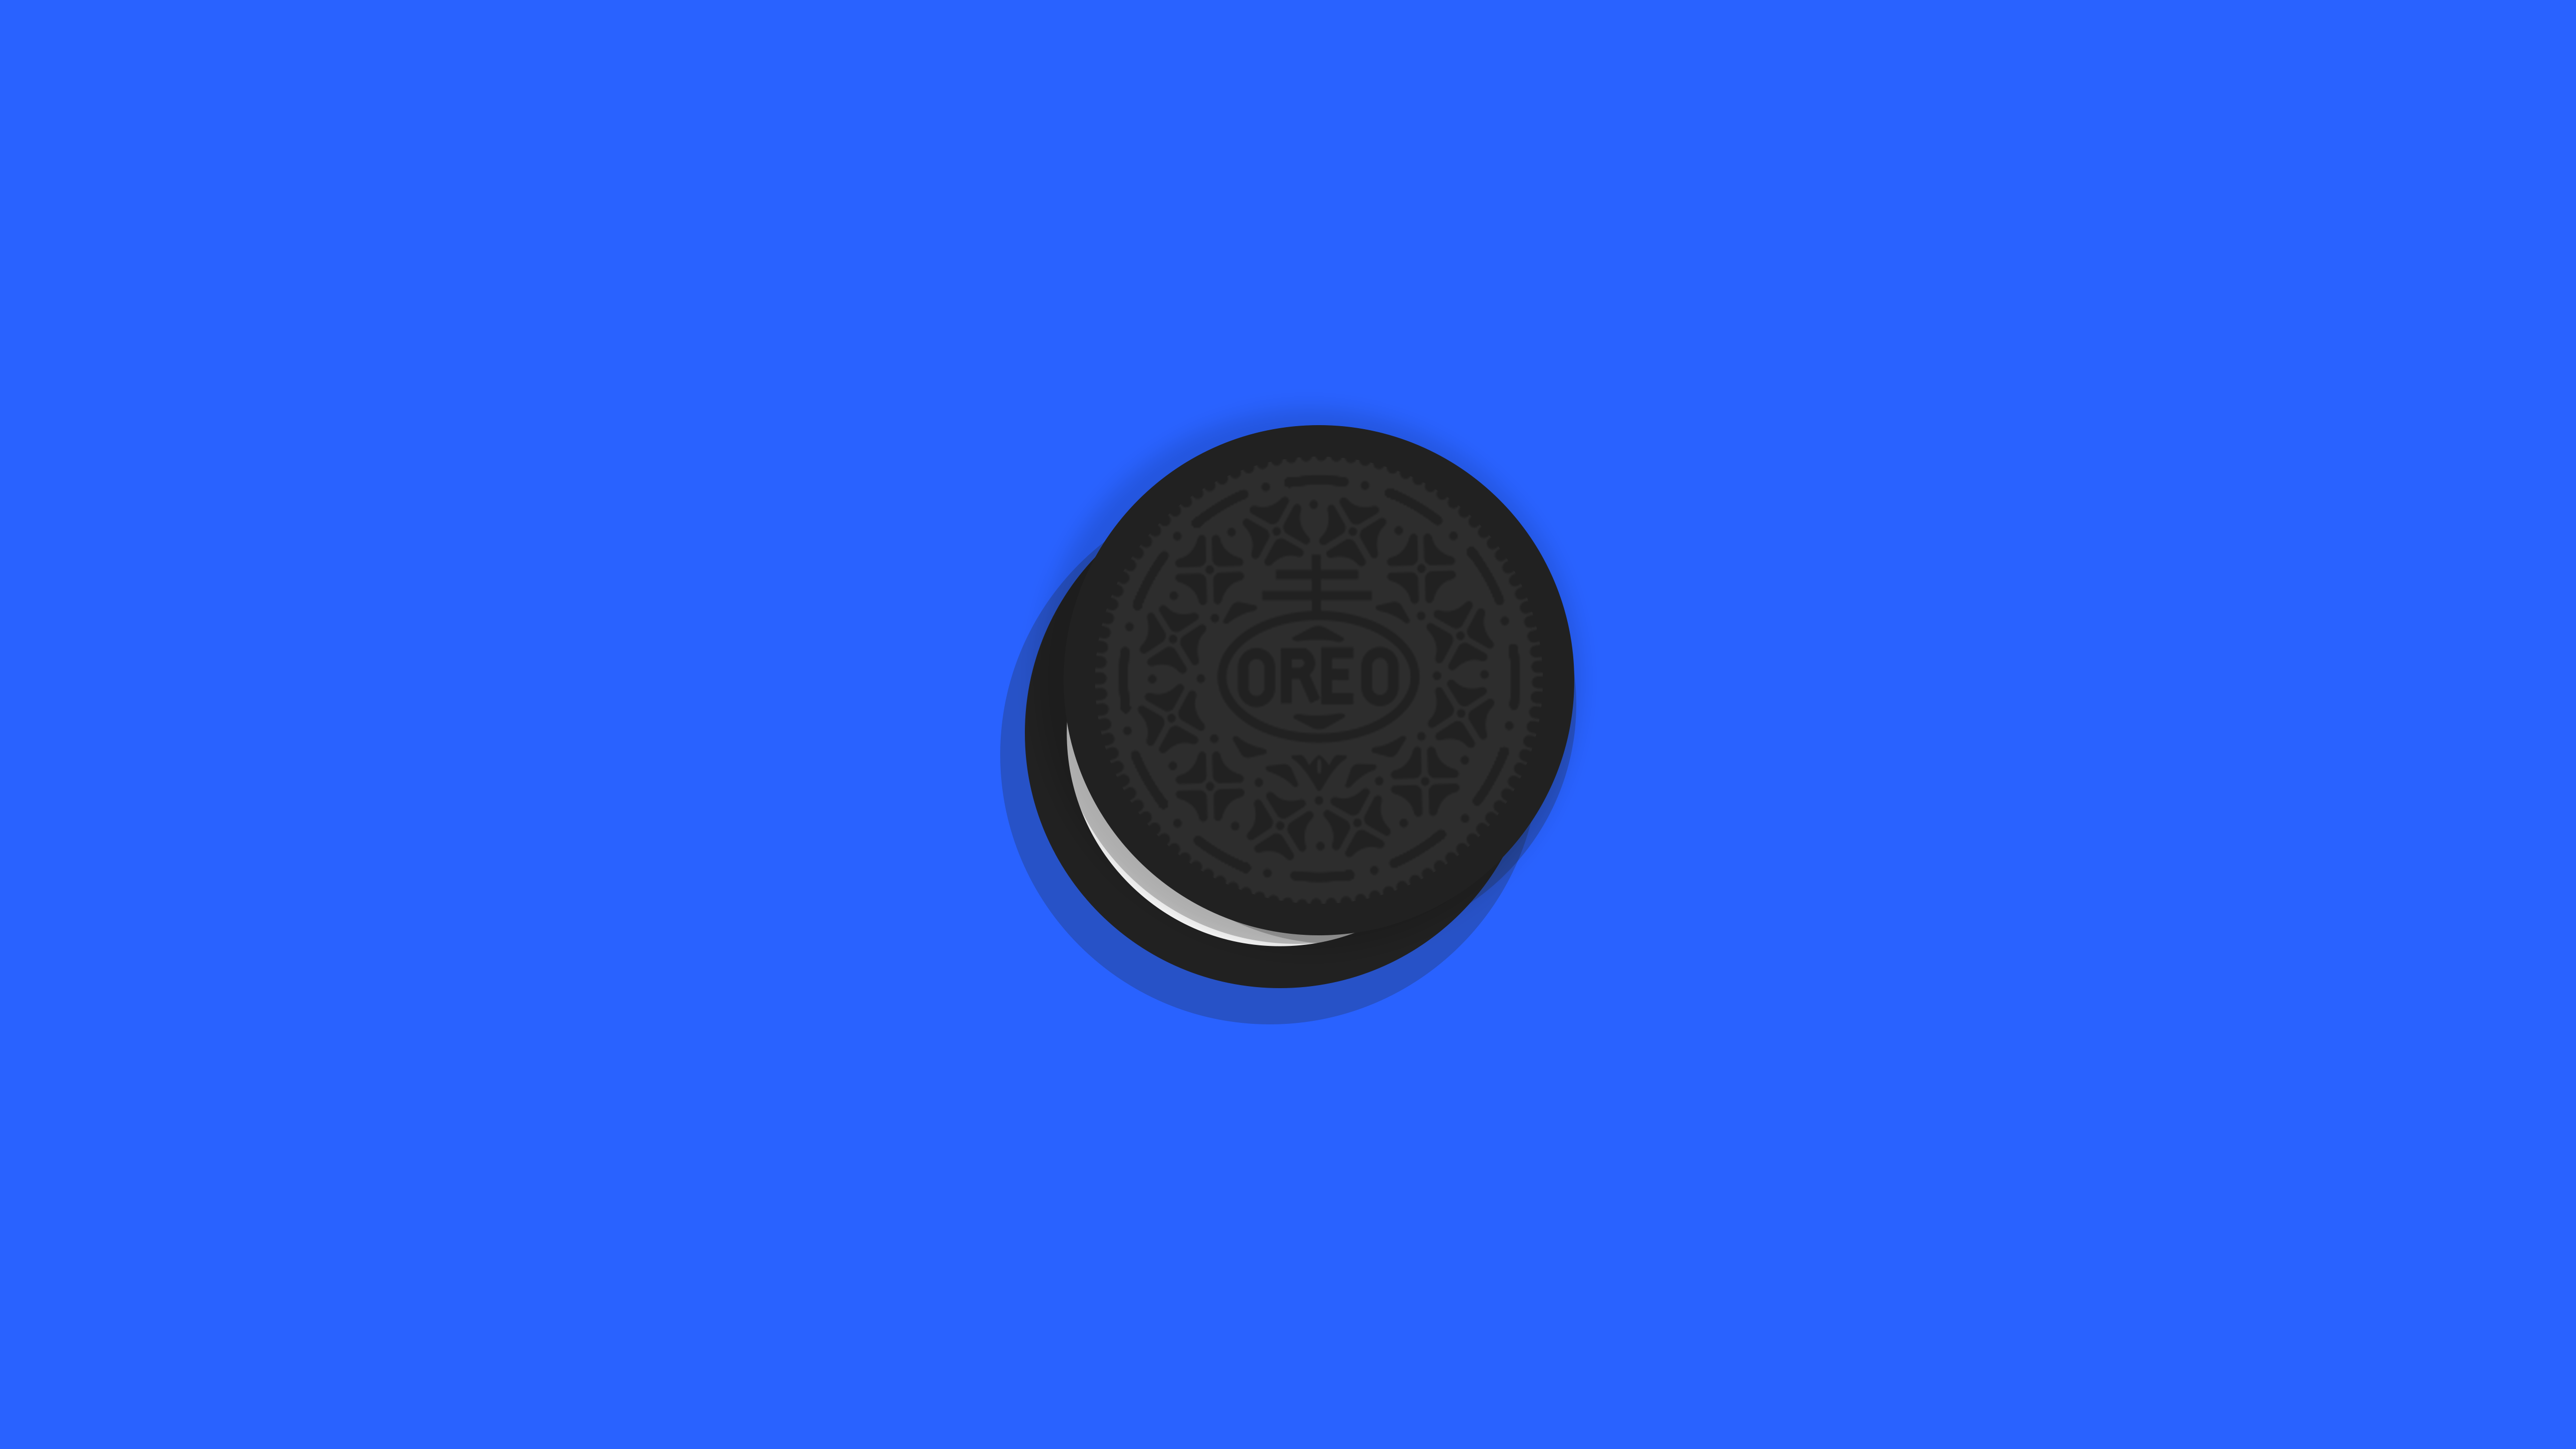 An Oreo cookie on a blue background - Oreo